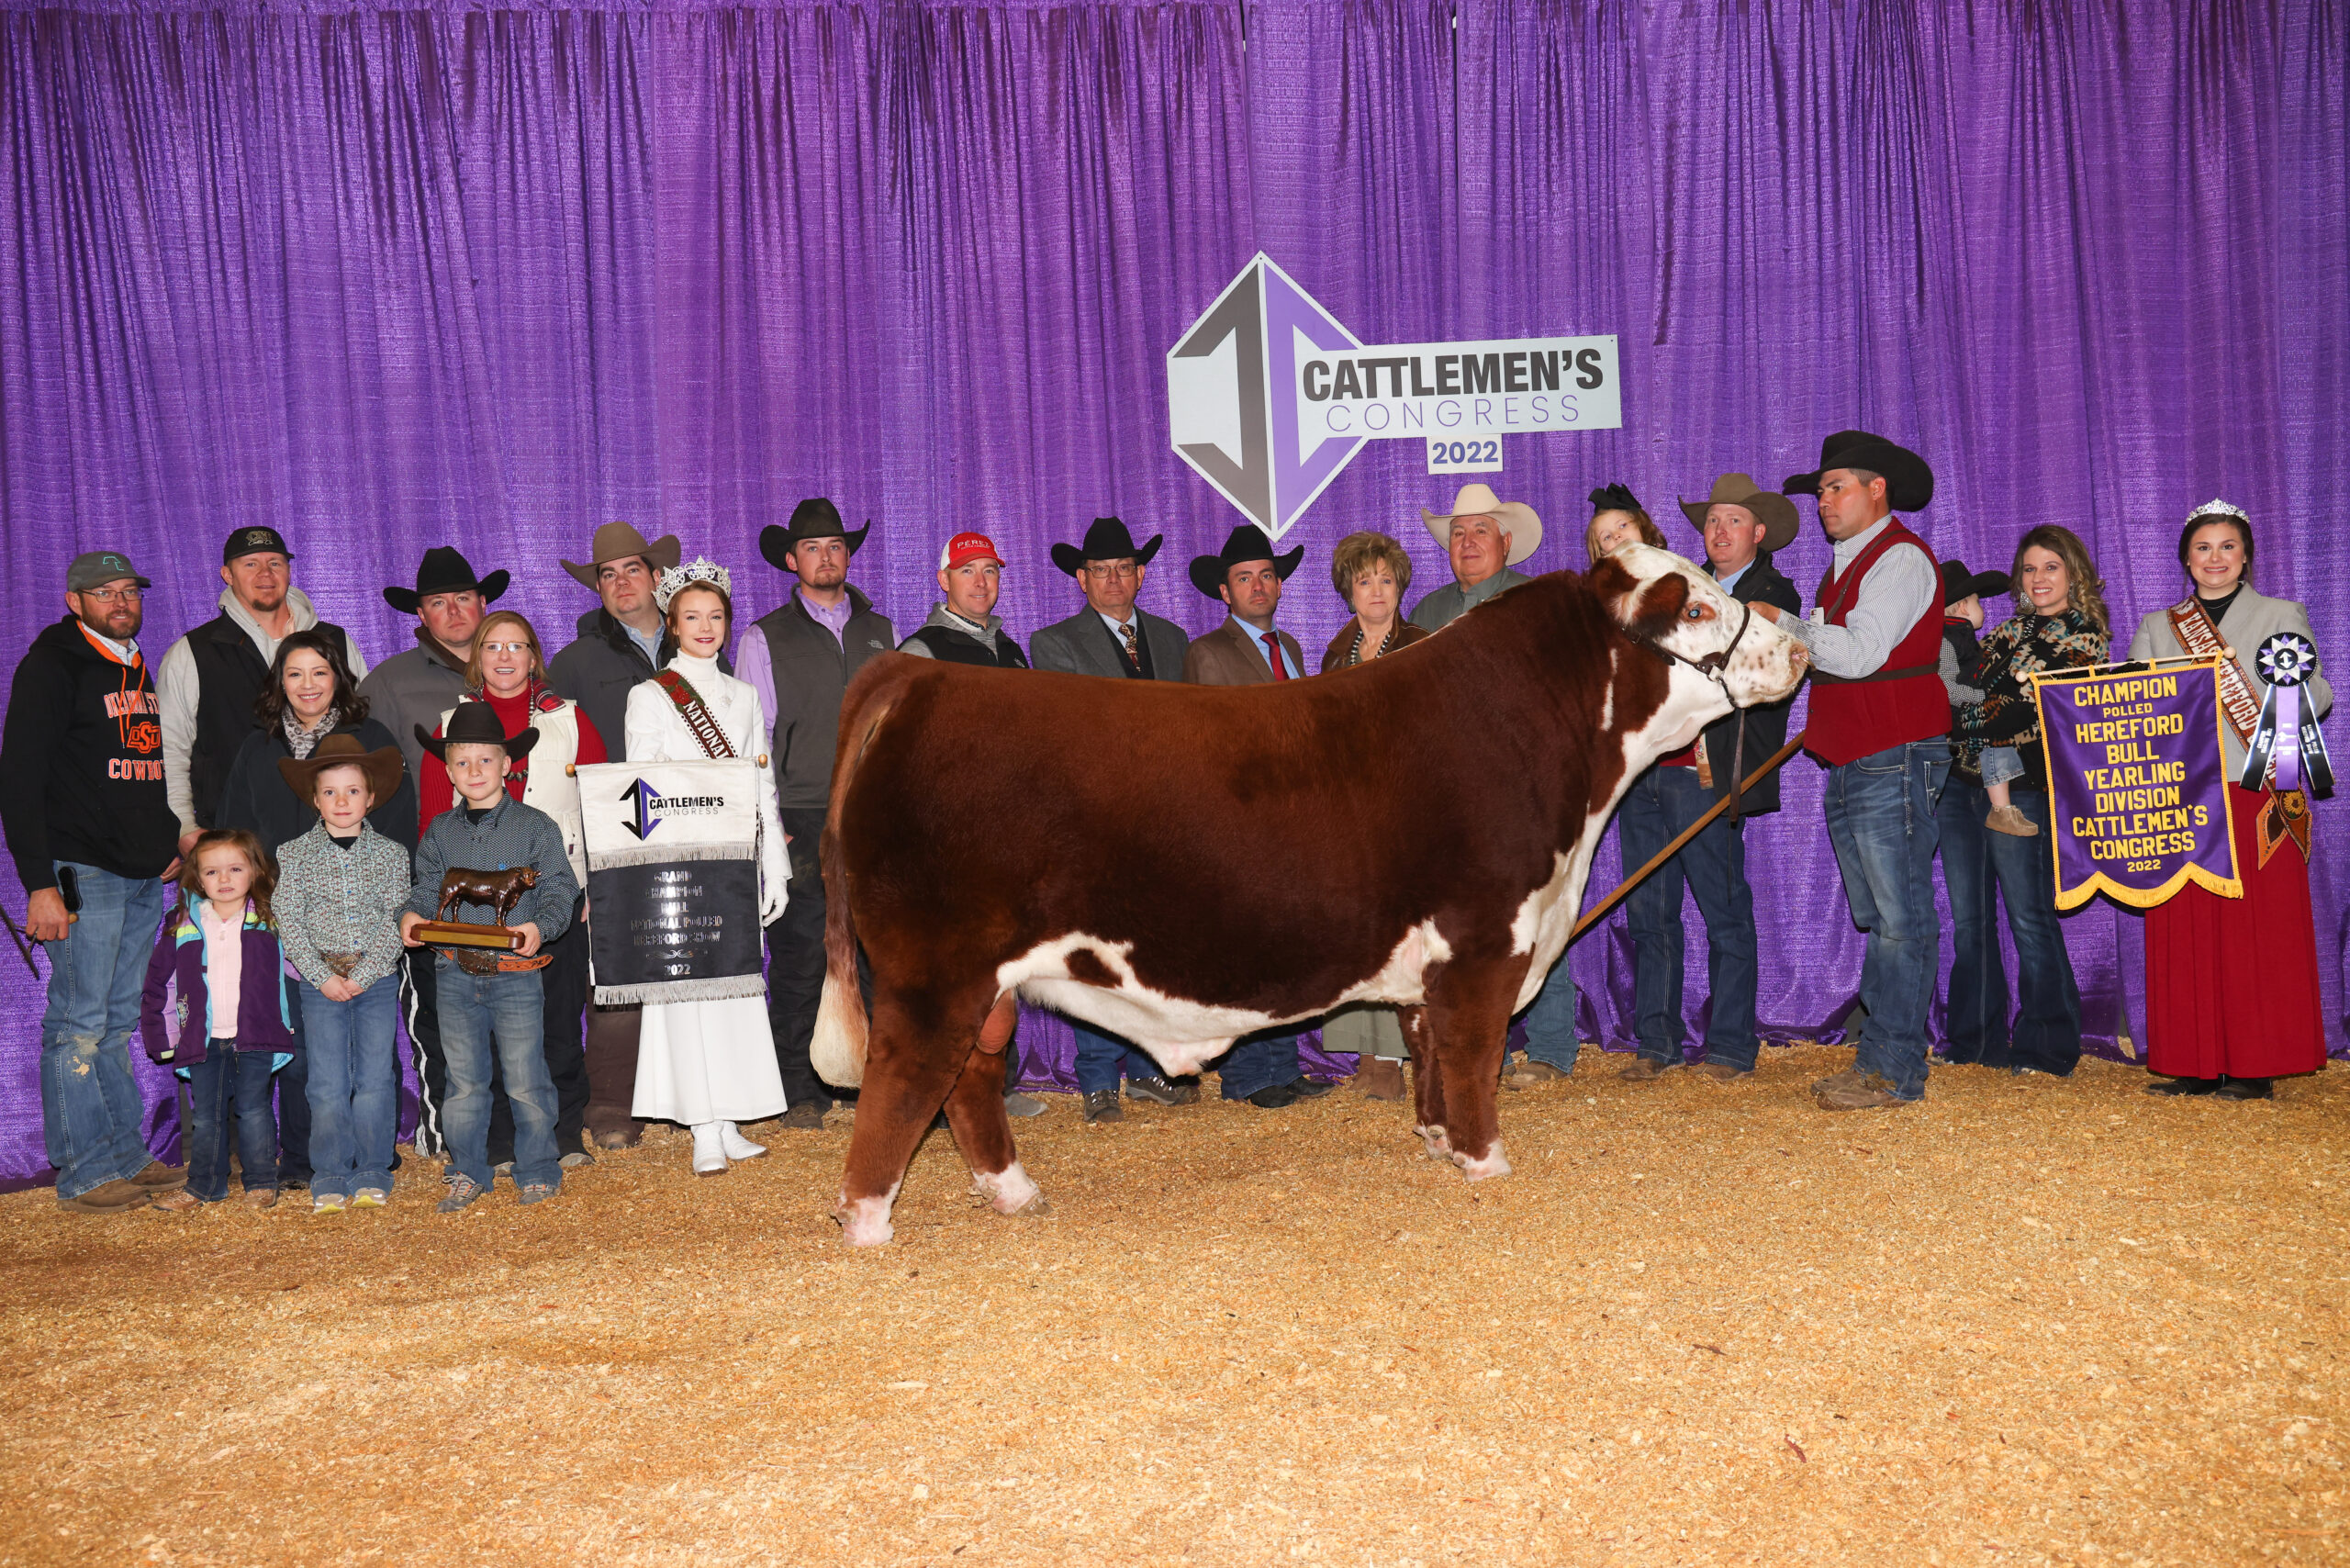 American Hereford Hereford Champions Named at 2022 Cattlemens Congress